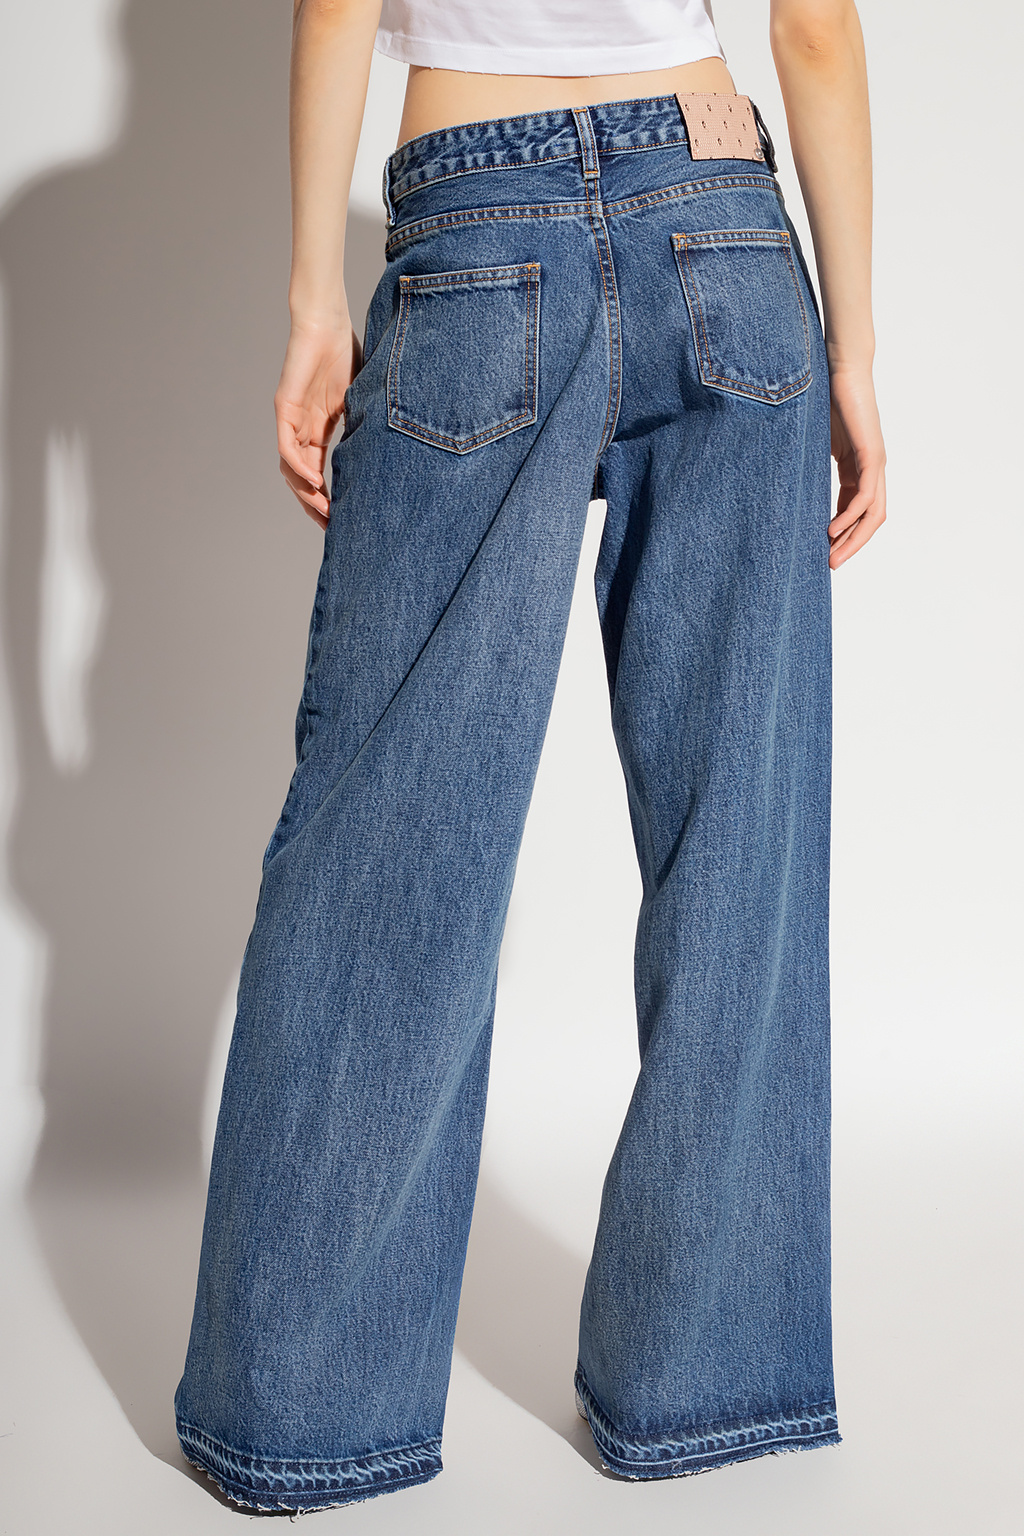 Red valentino pointed-toe Jeans with pockets